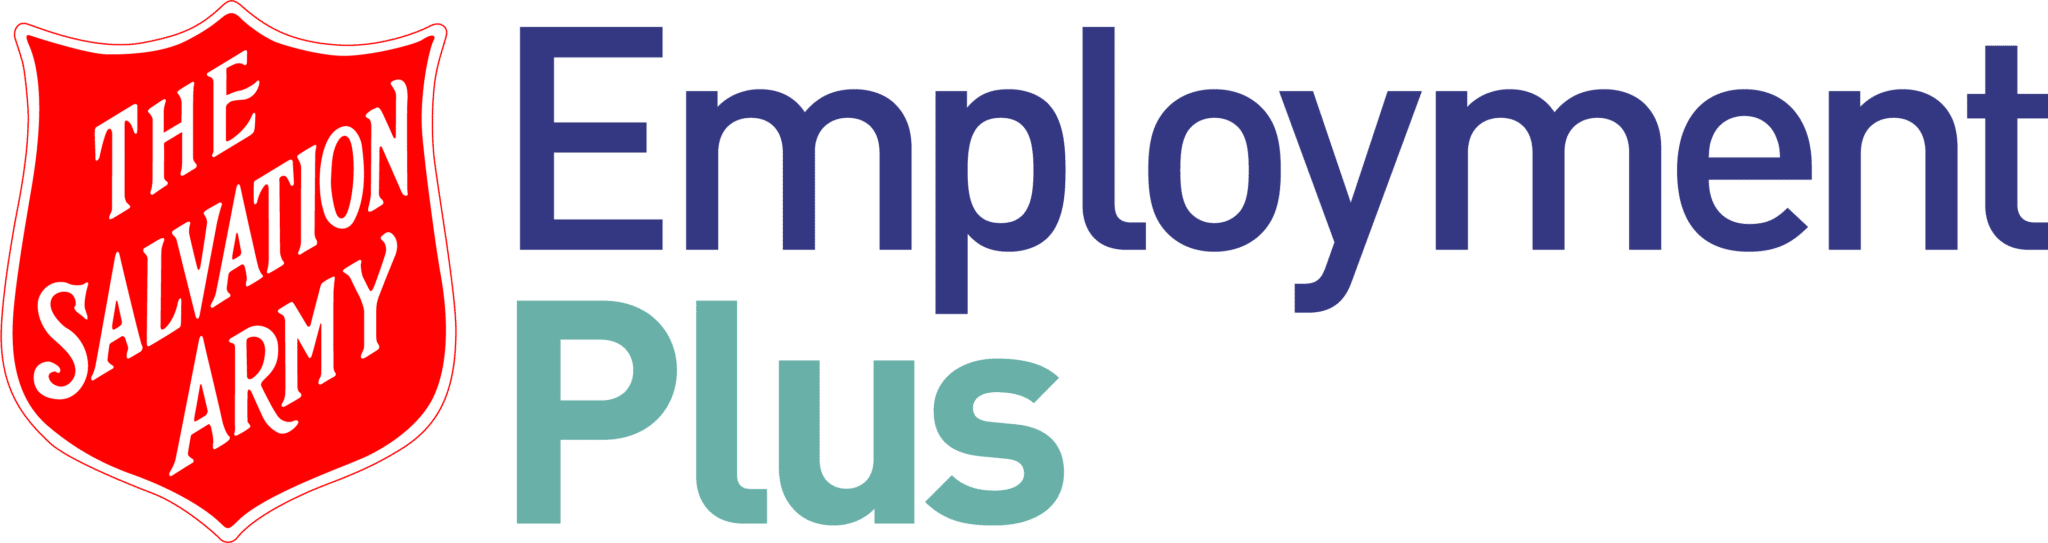 The Salvation Army - Employment Plus